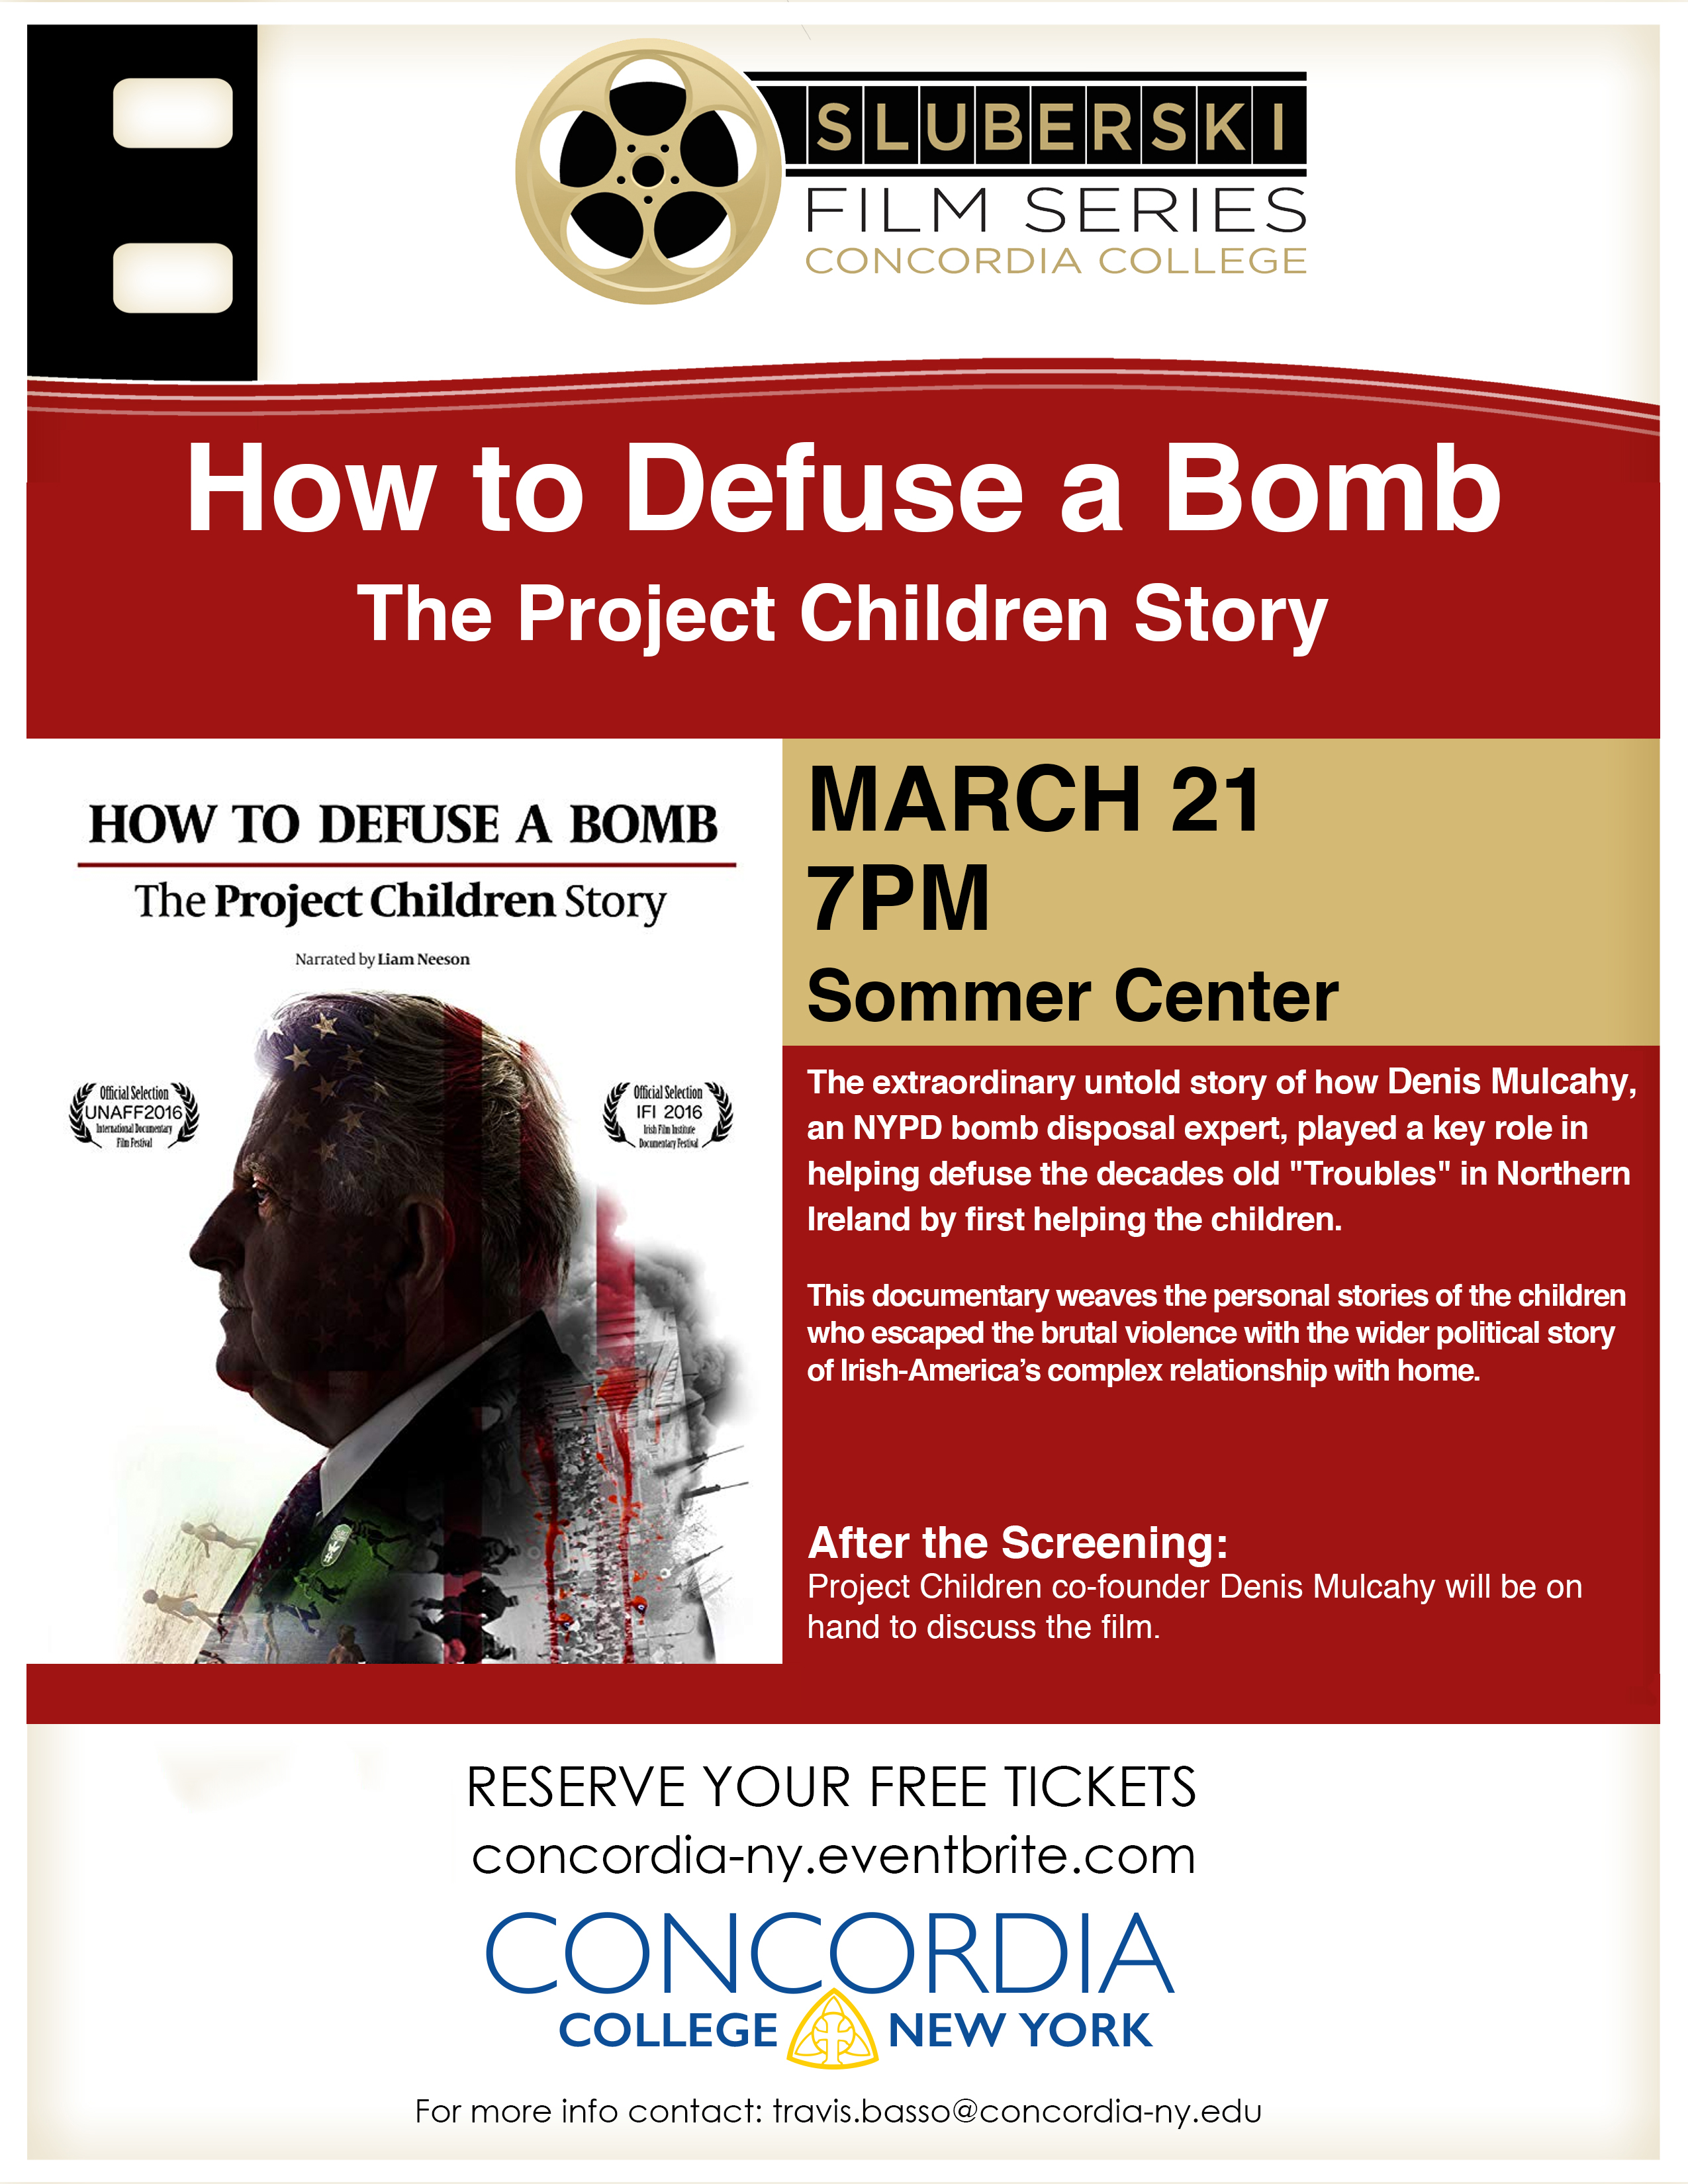 sluberski film series poster for how to defuse a bomb